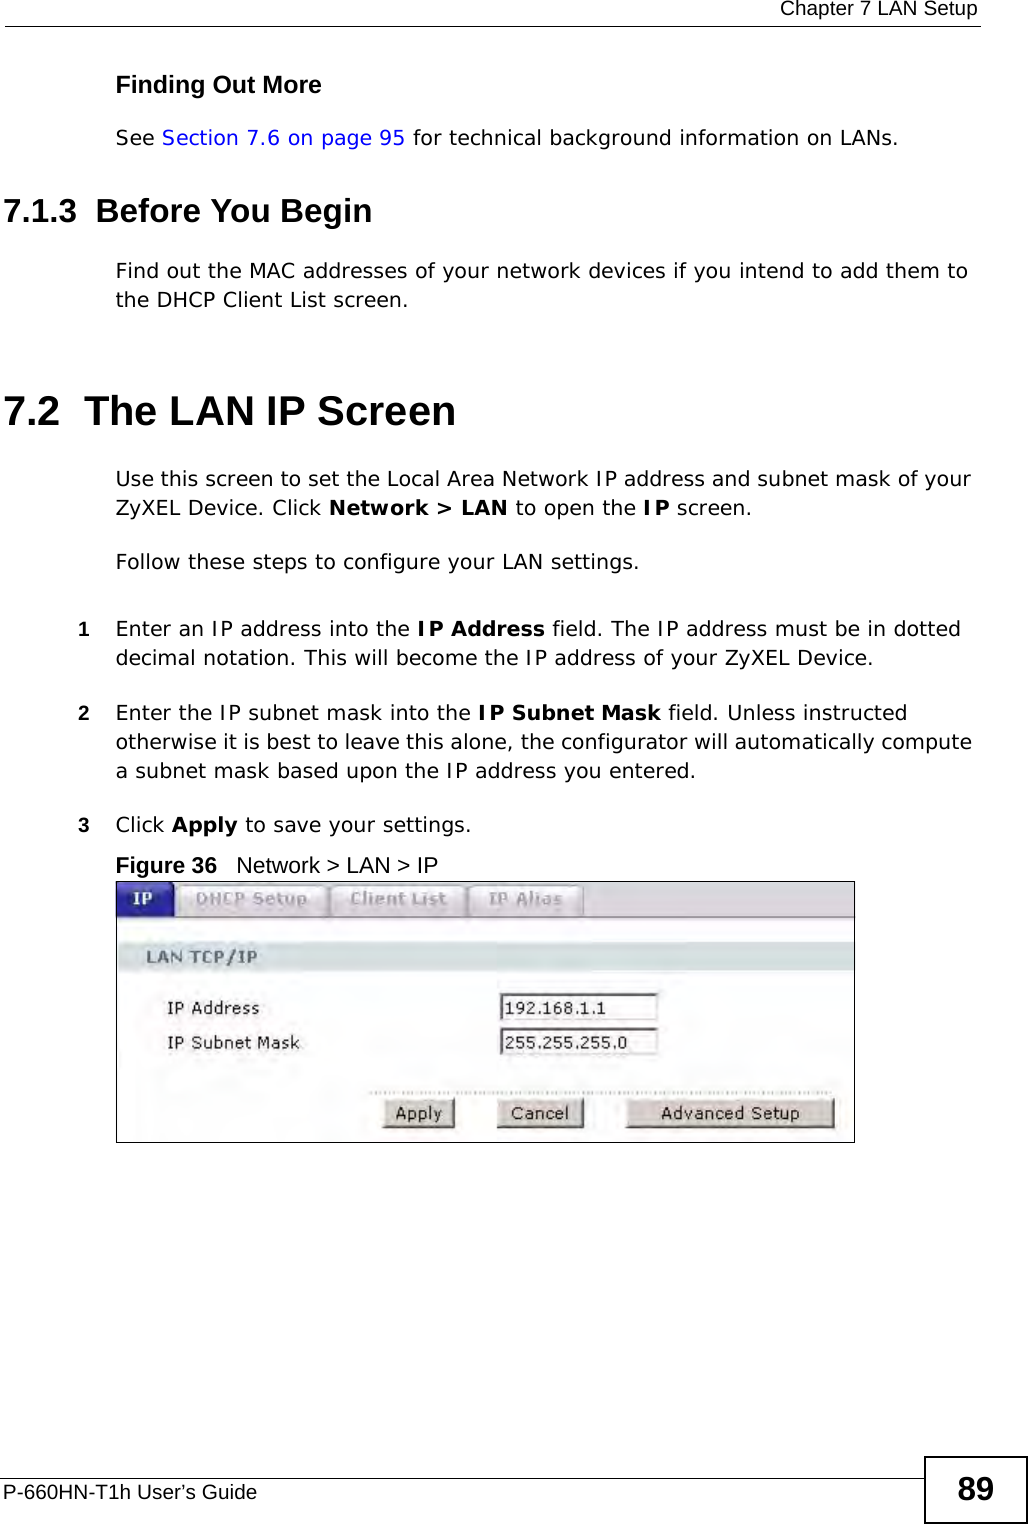  Chapter 7 LAN SetupP-660HN-T1h User’s Guide 89Finding Out MoreSee Section 7.6 on page 95 for technical background information on LANs.7.1.3  Before You BeginFind out the MAC addresses of your network devices if you intend to add them to the DHCP Client List screen.7.2  The LAN IP ScreenUse this screen to set the Local Area Network IP address and subnet mask of your ZyXEL Device. Click Network &gt; LAN to open the IP screen. Follow these steps to configure your LAN settings.1Enter an IP address into the IP Address field. The IP address must be in dotted decimal notation. This will become the IP address of your ZyXEL Device.2Enter the IP subnet mask into the IP Subnet Mask field. Unless instructed otherwise it is best to leave this alone, the configurator will automatically compute a subnet mask based upon the IP address you entered.3Click Apply to save your settings.Figure 36   Network &gt; LAN &gt; IP